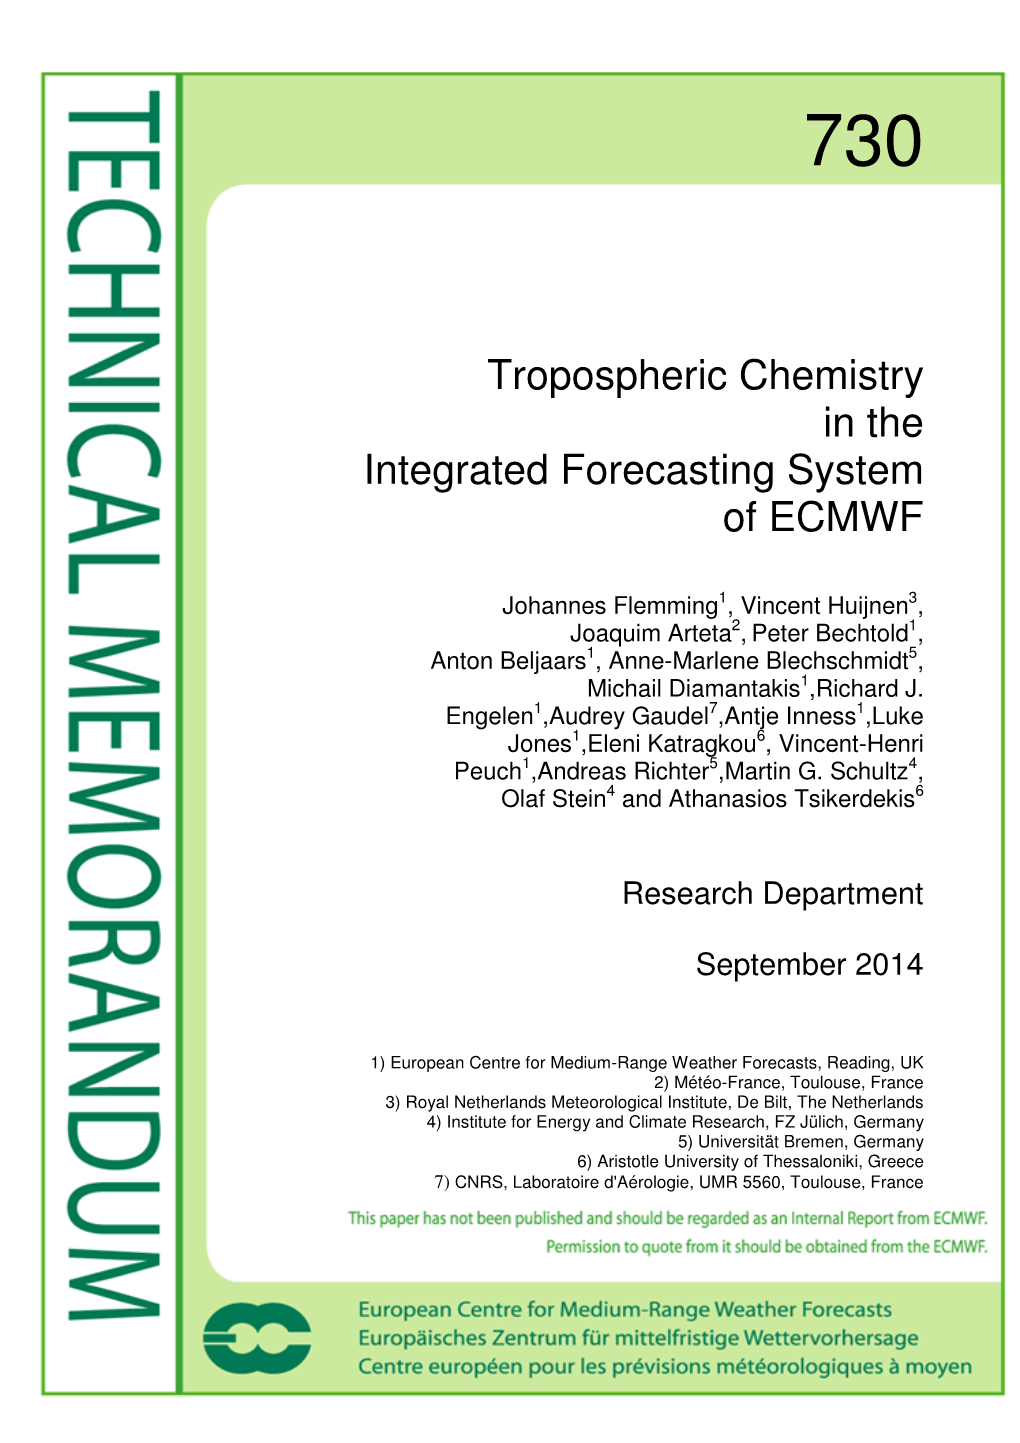 Tropospheric Chemistry in the Integrated Forecasting System of ECMWF